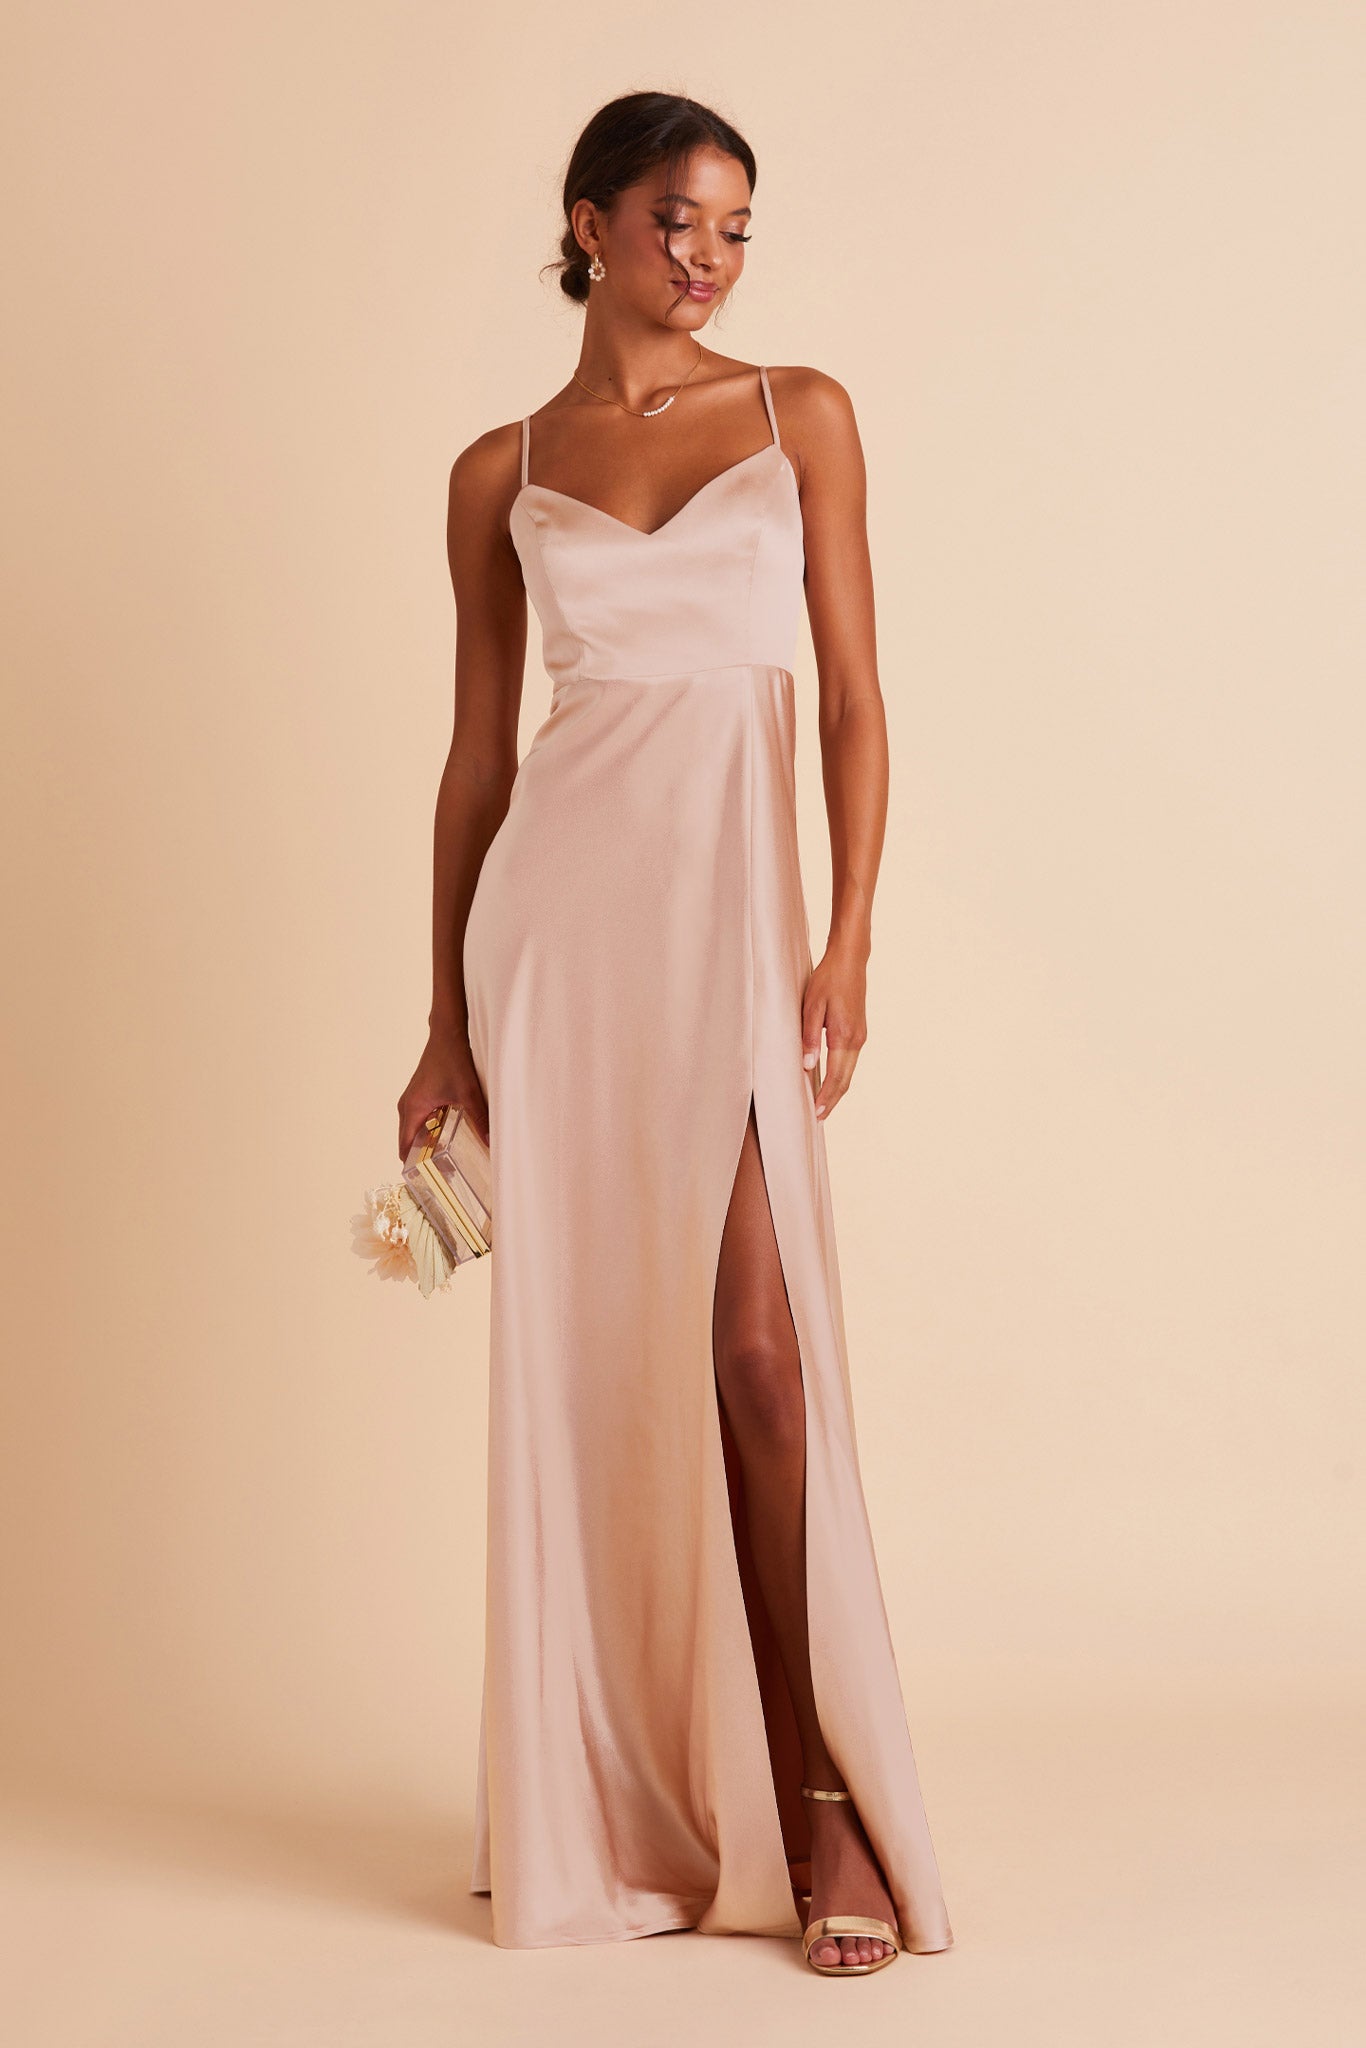 Matte Satin Dress in Rose Gold by Birdy Grey